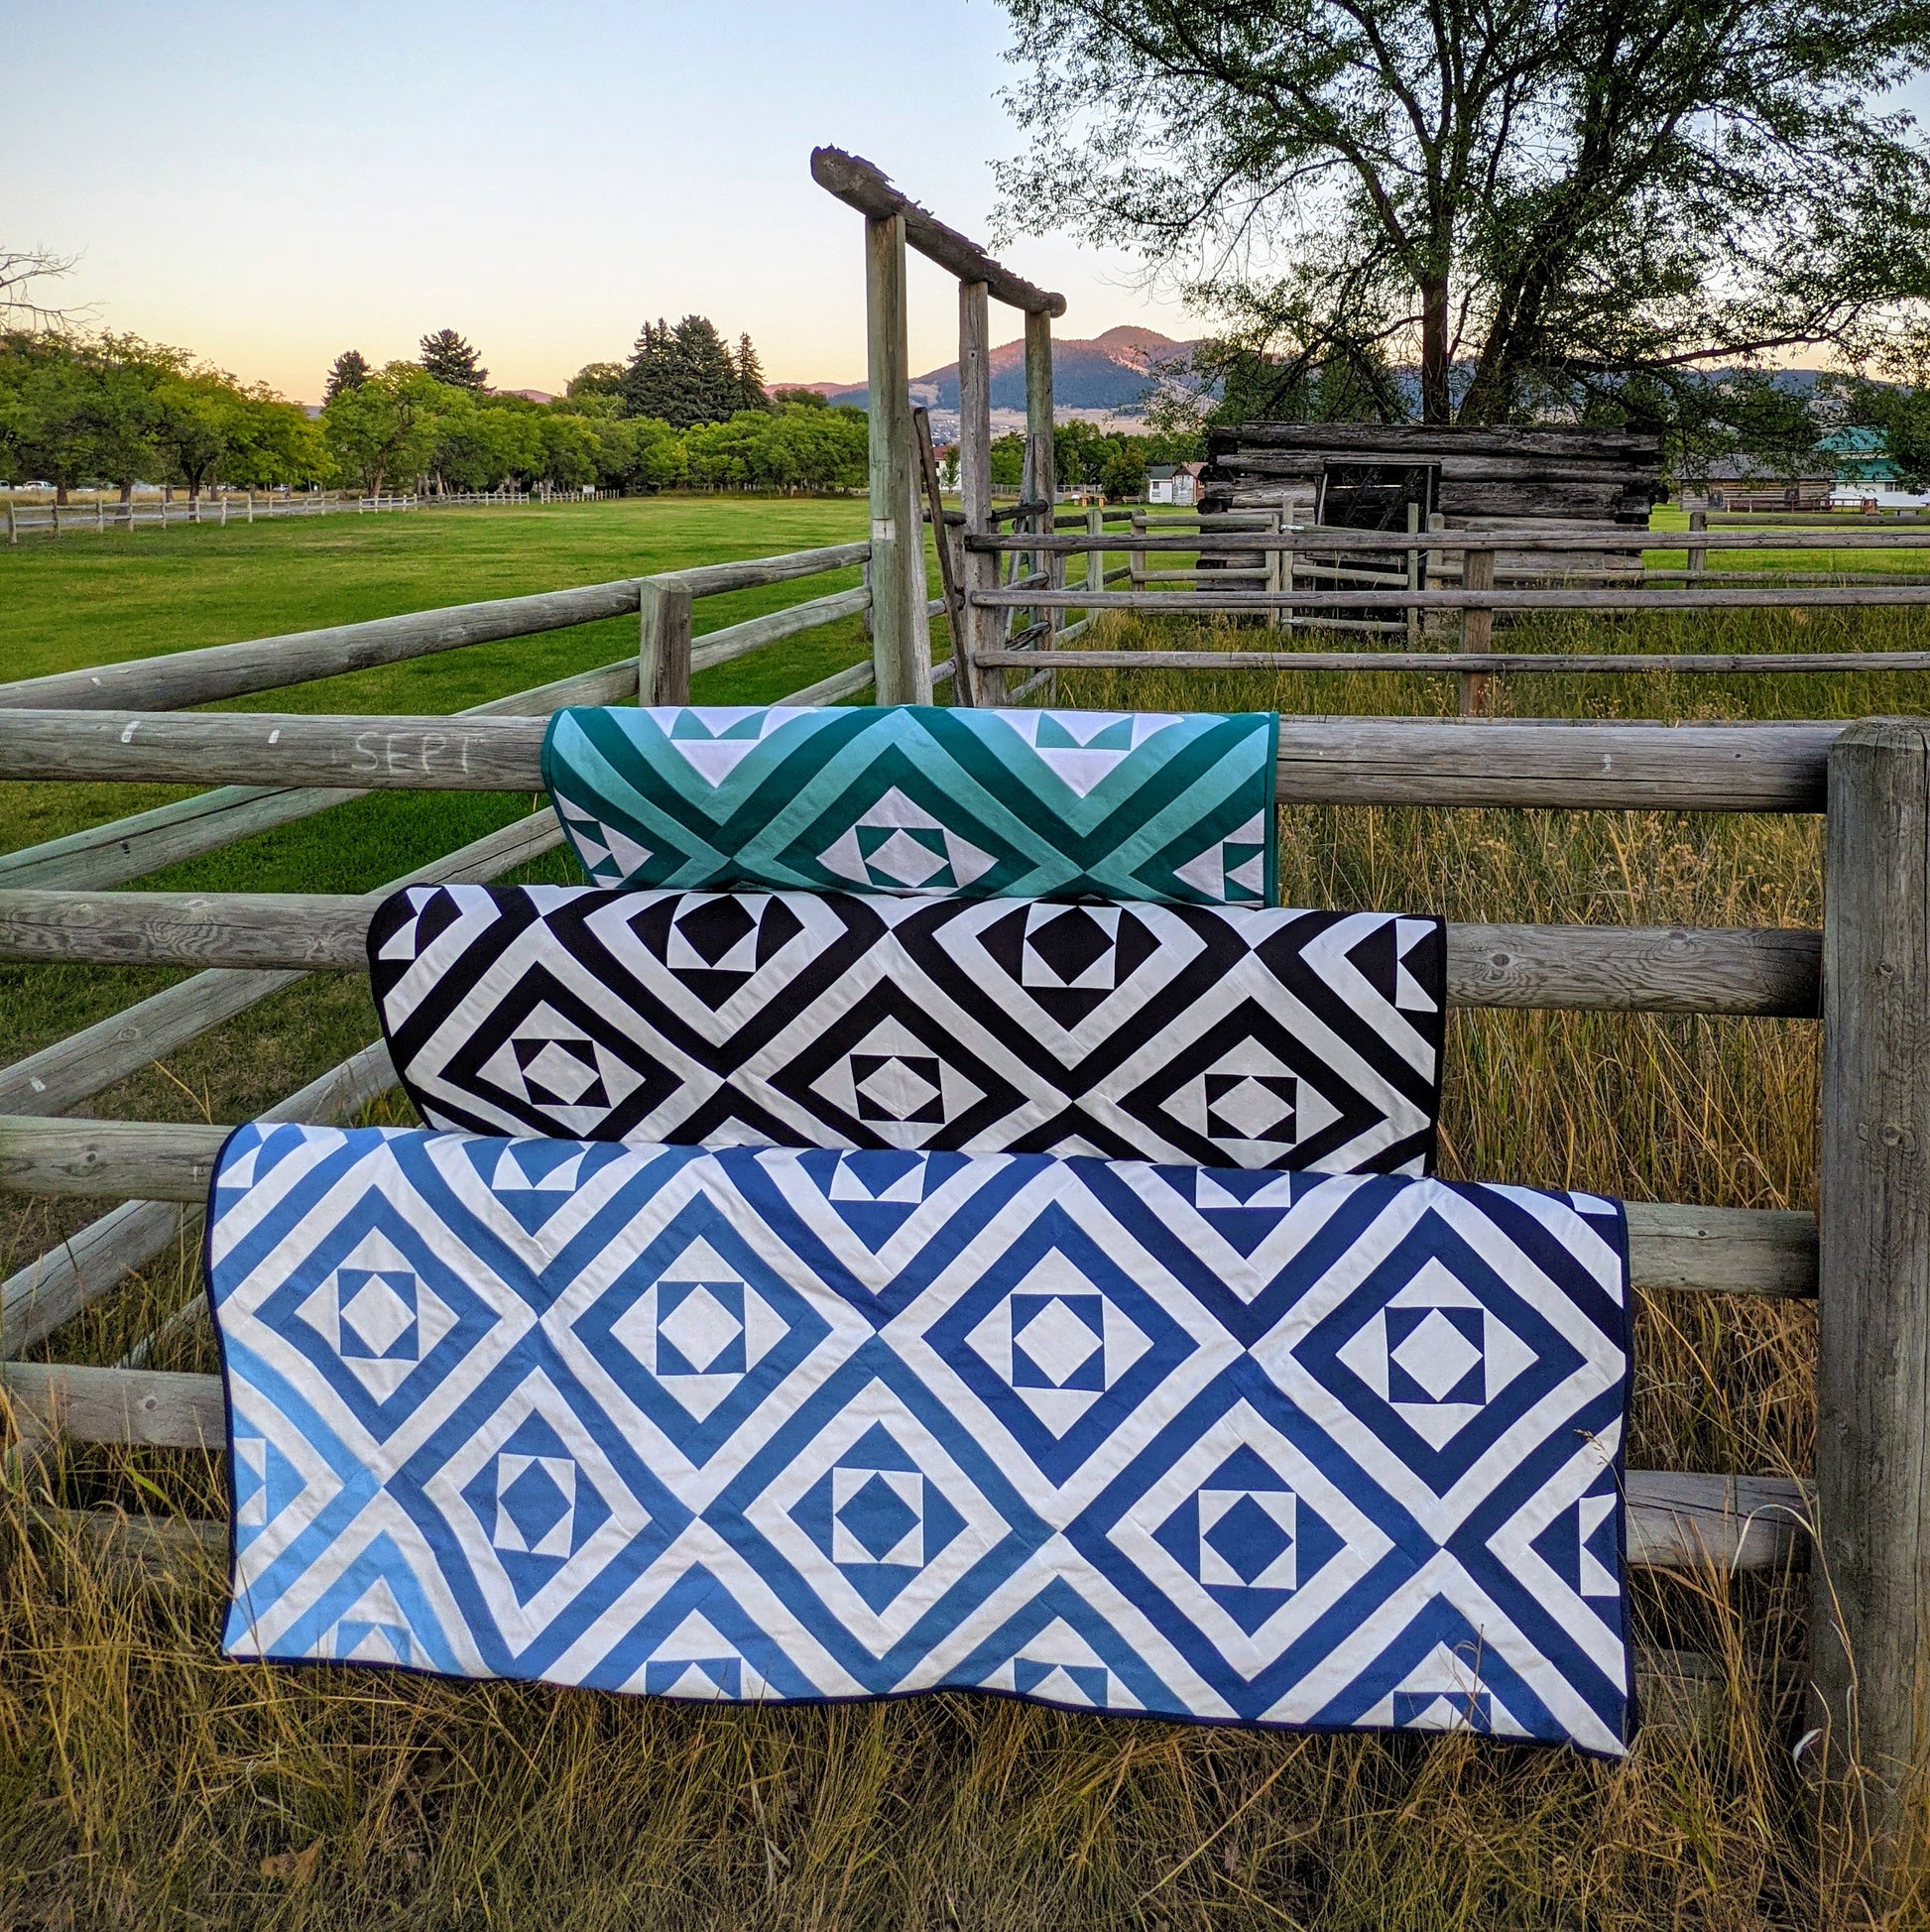 Three quilts on a fence.